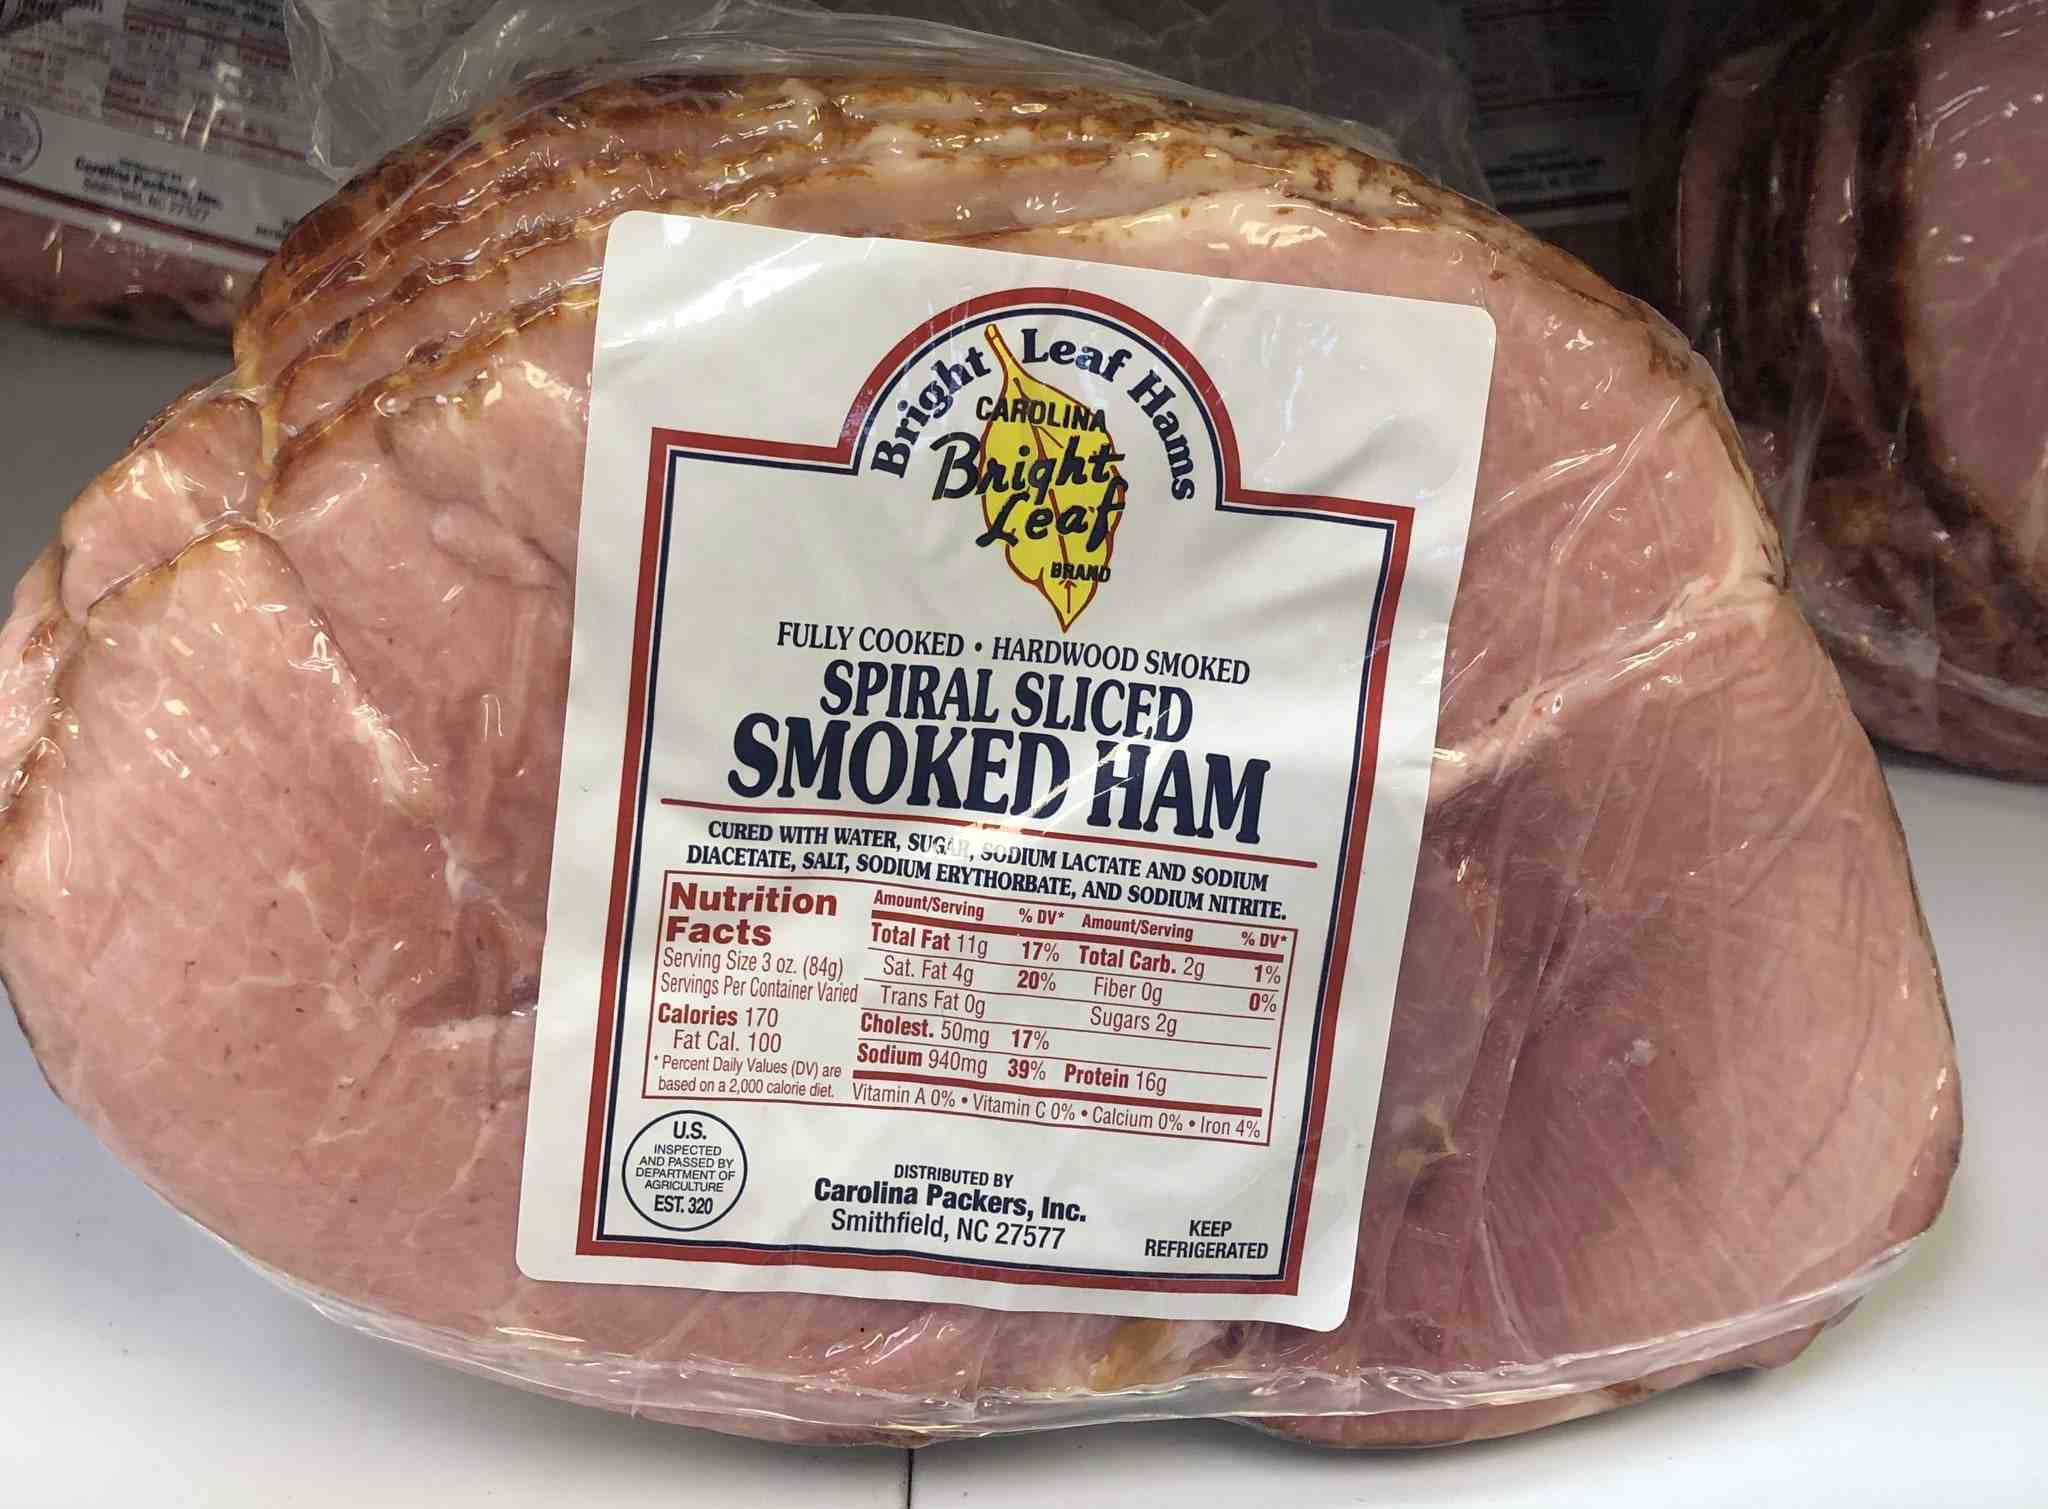 Are smoked spiral hams precooked?